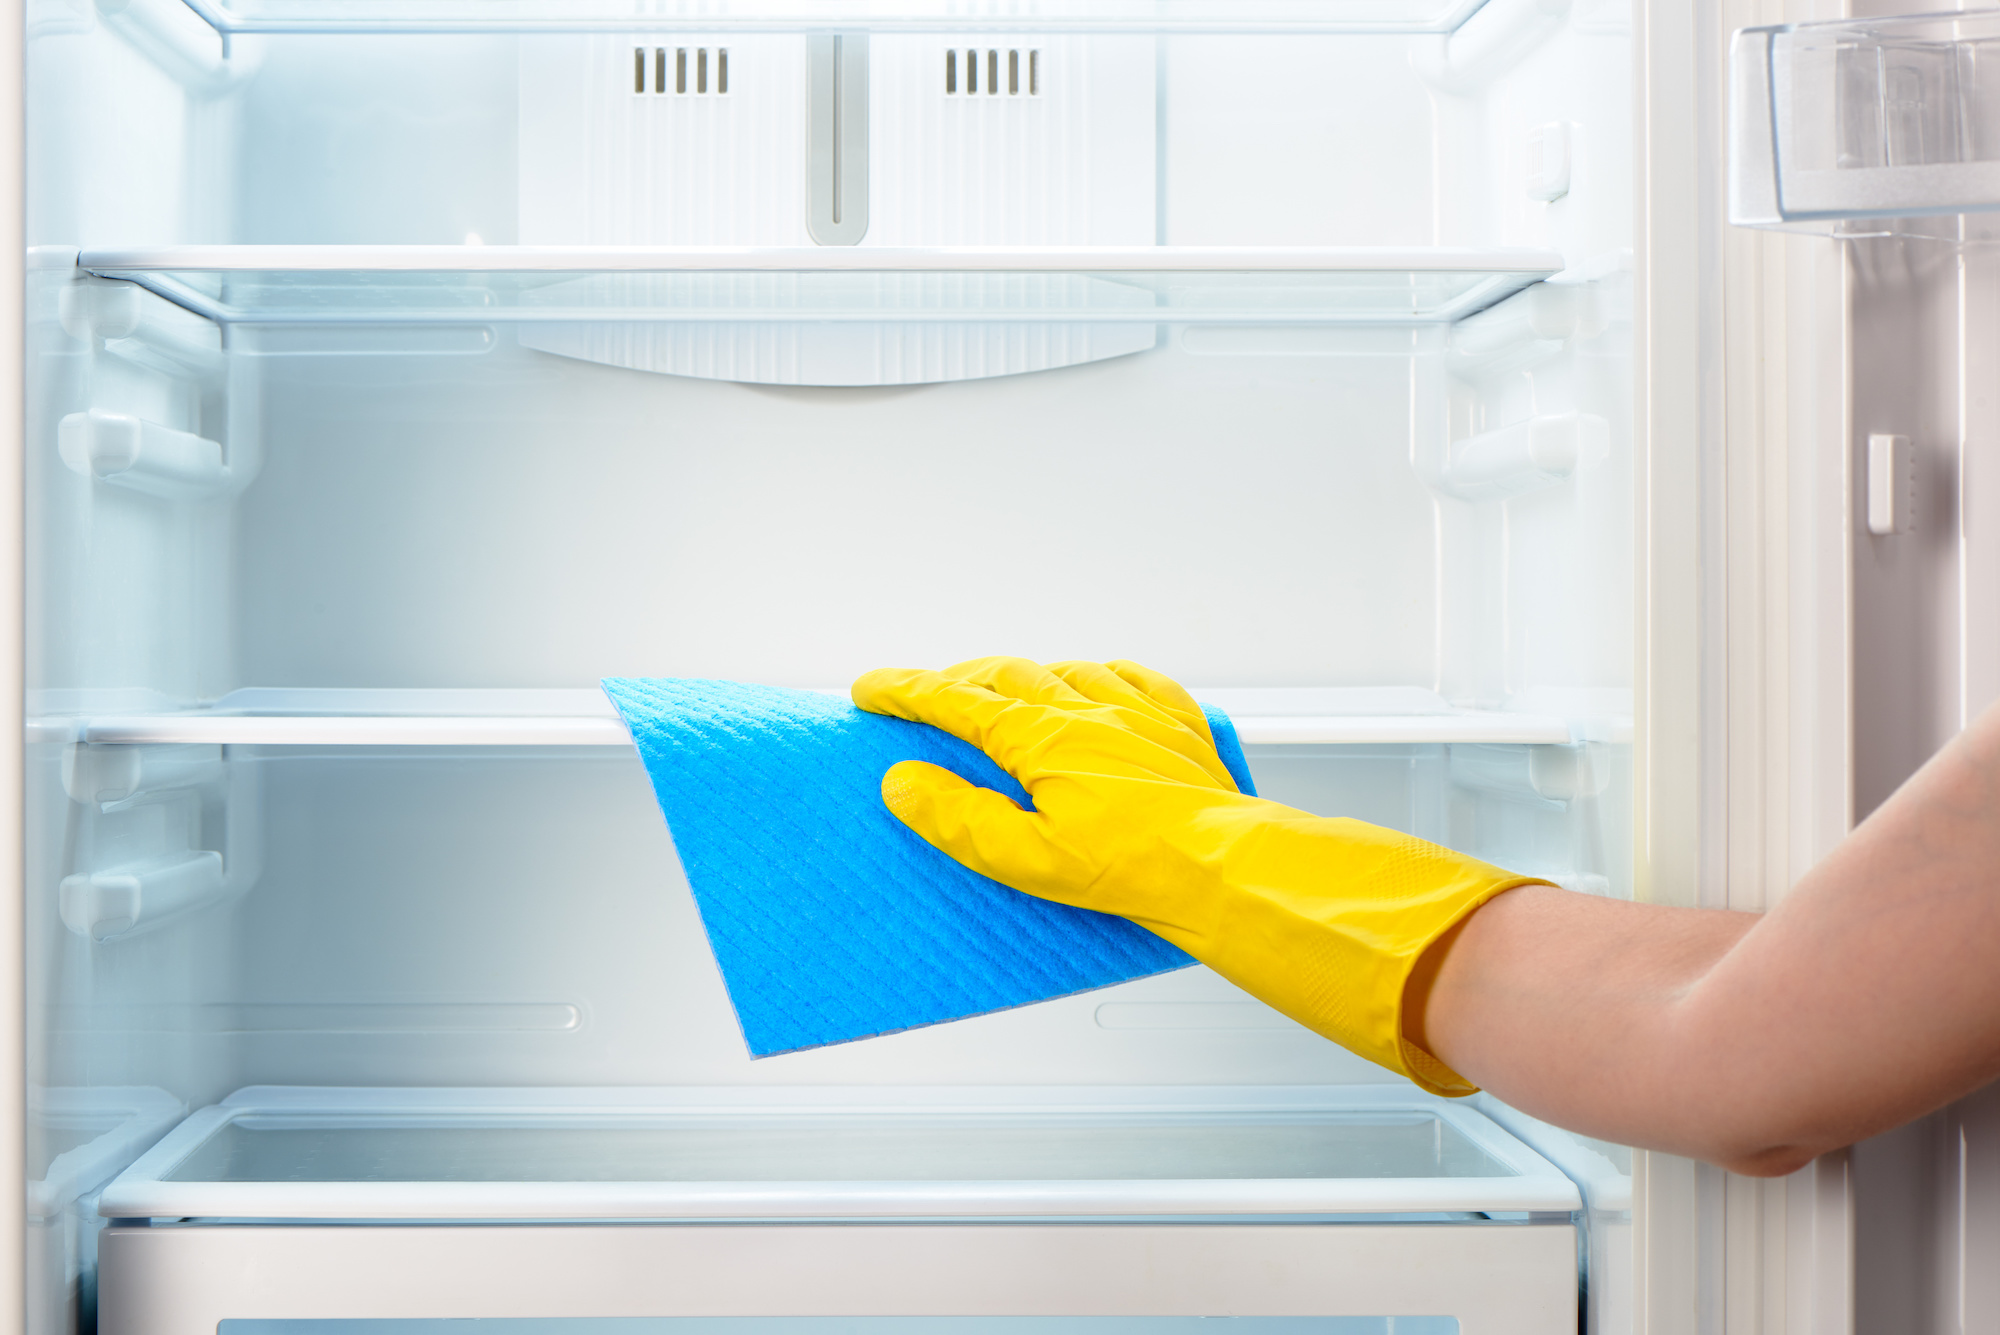 Hands with yellow gloves clean inner refrigerator shelves.